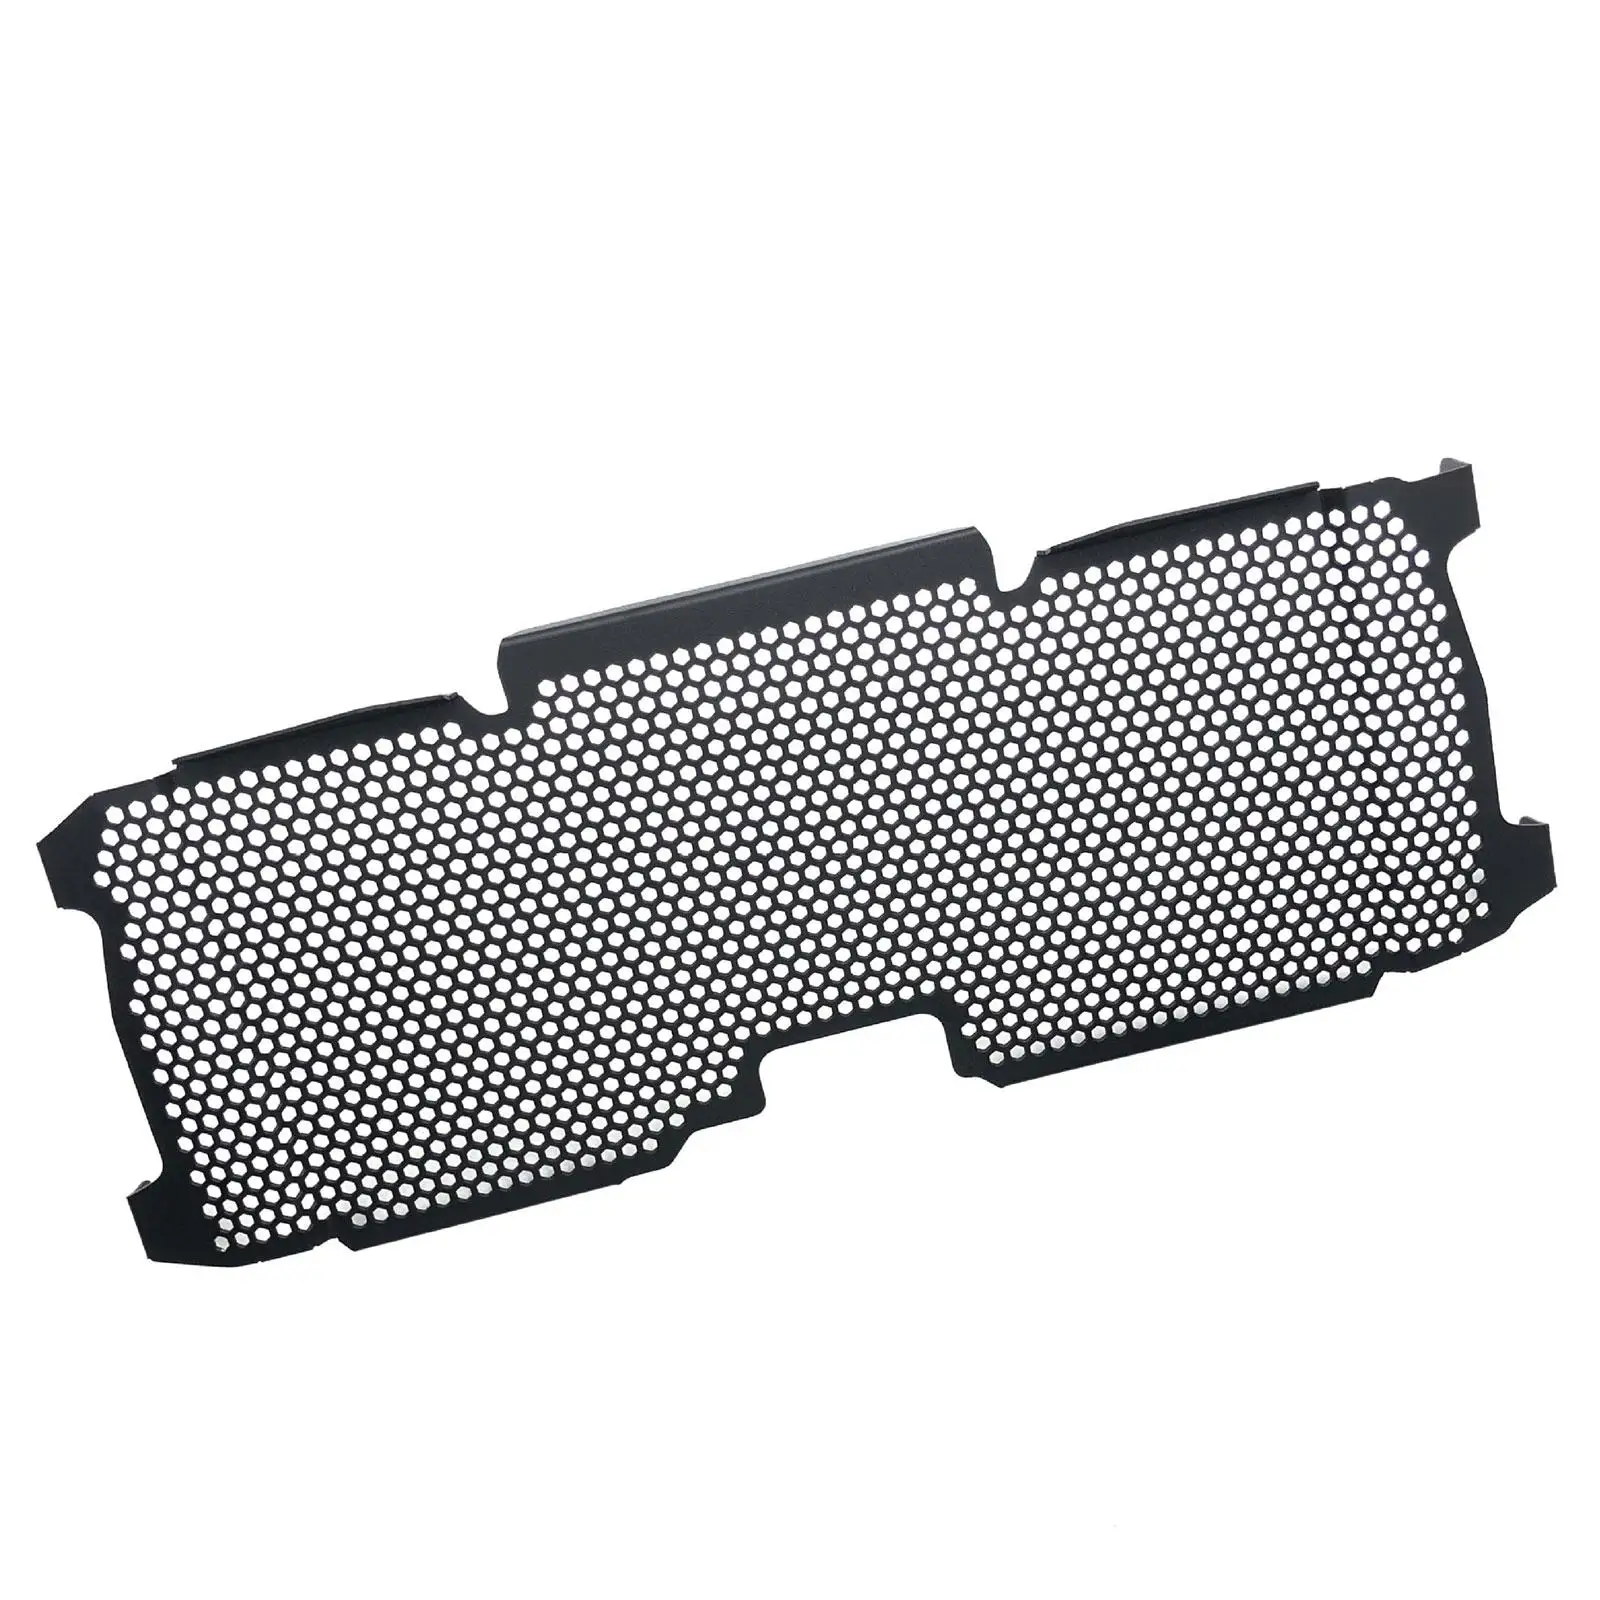 Radiator Guard Grille Protector Replacement Motorcycle Refits Accessories Trim